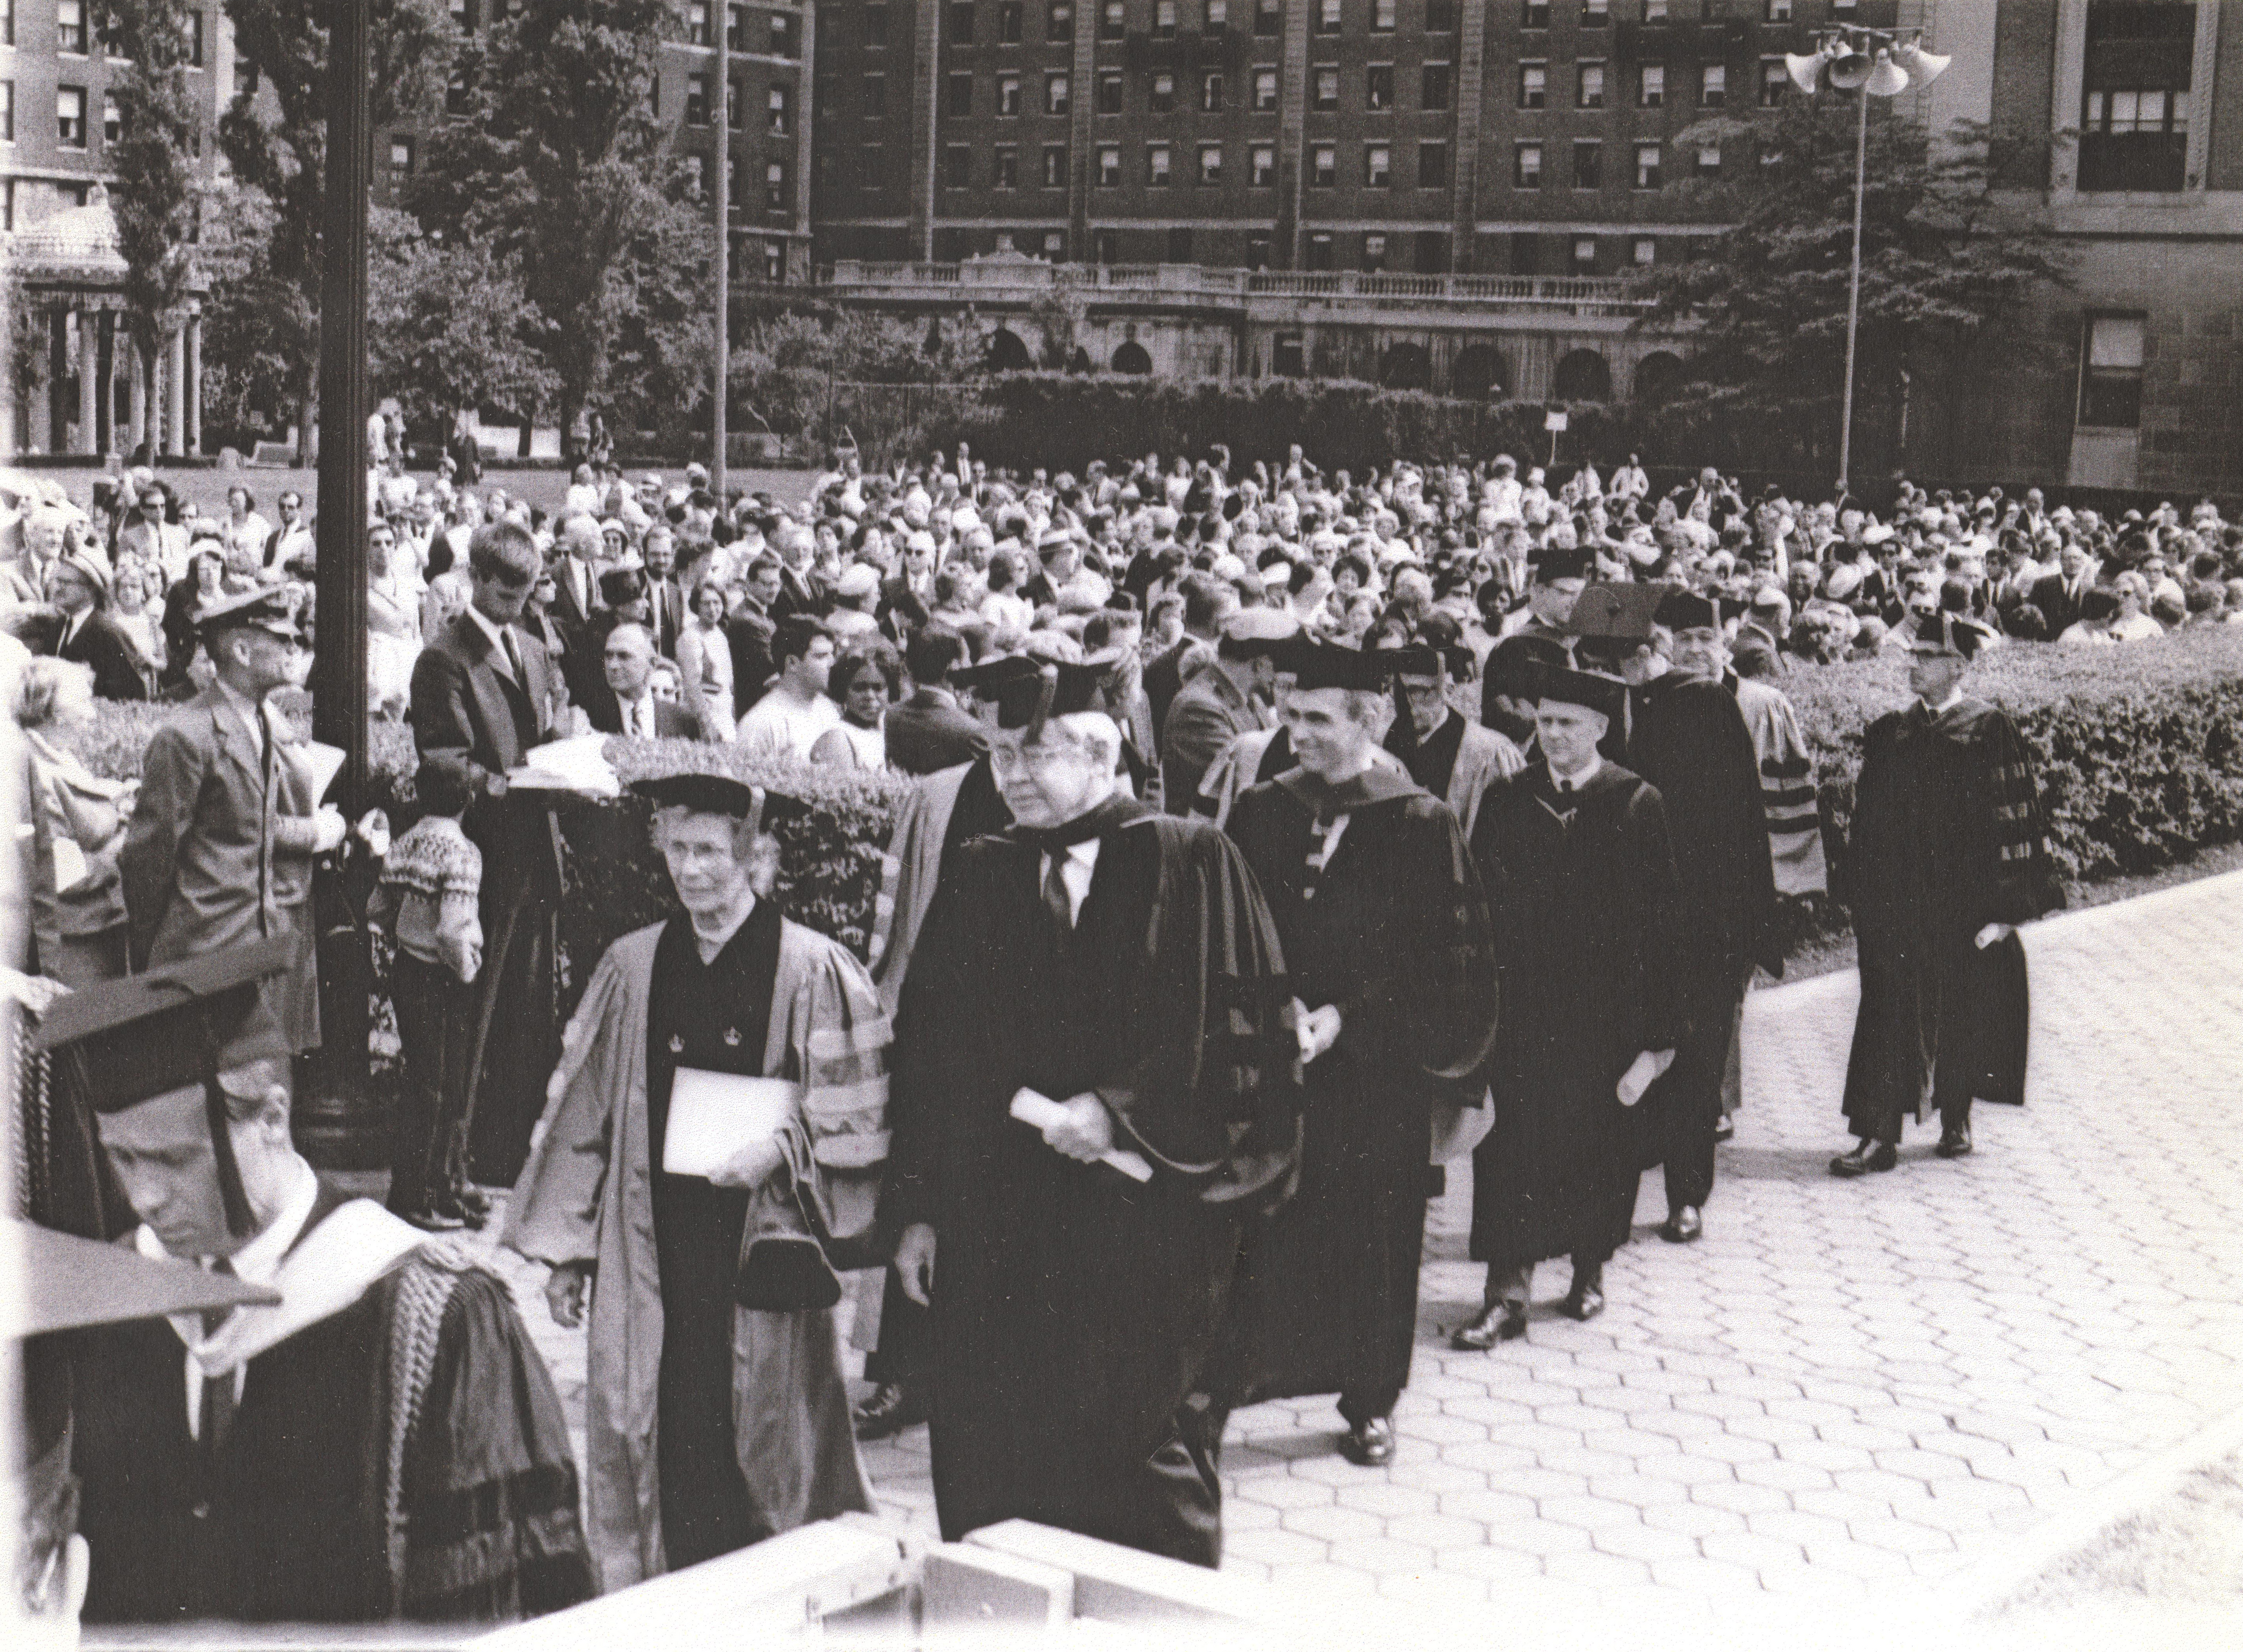 Inge Lehmann about to receive her honorary degree at Columbia University